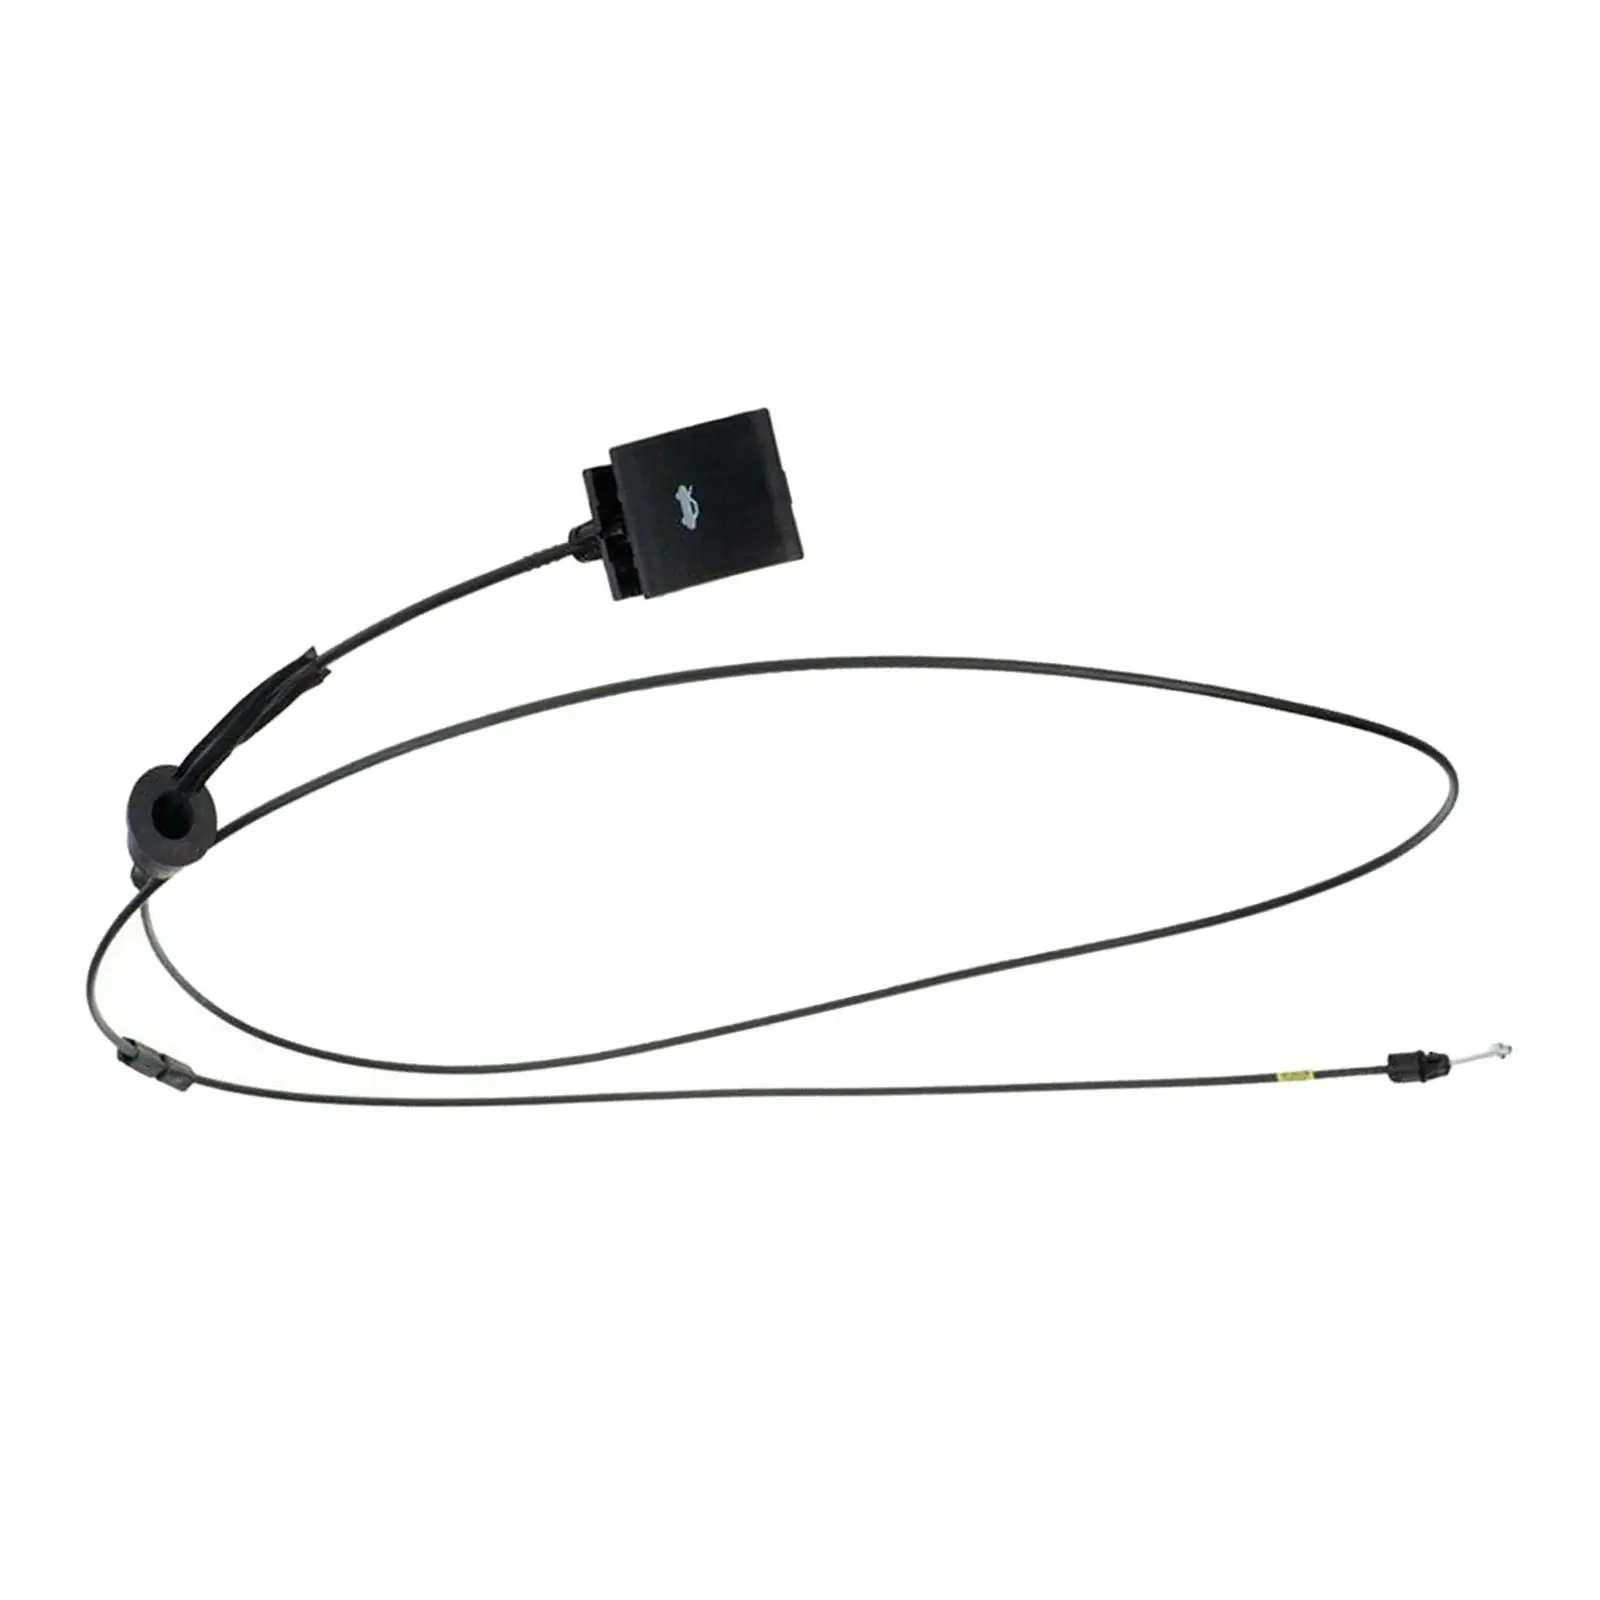 Hood Release Cable High Strength Vehicle for Chrysler 300 2011 to 2019